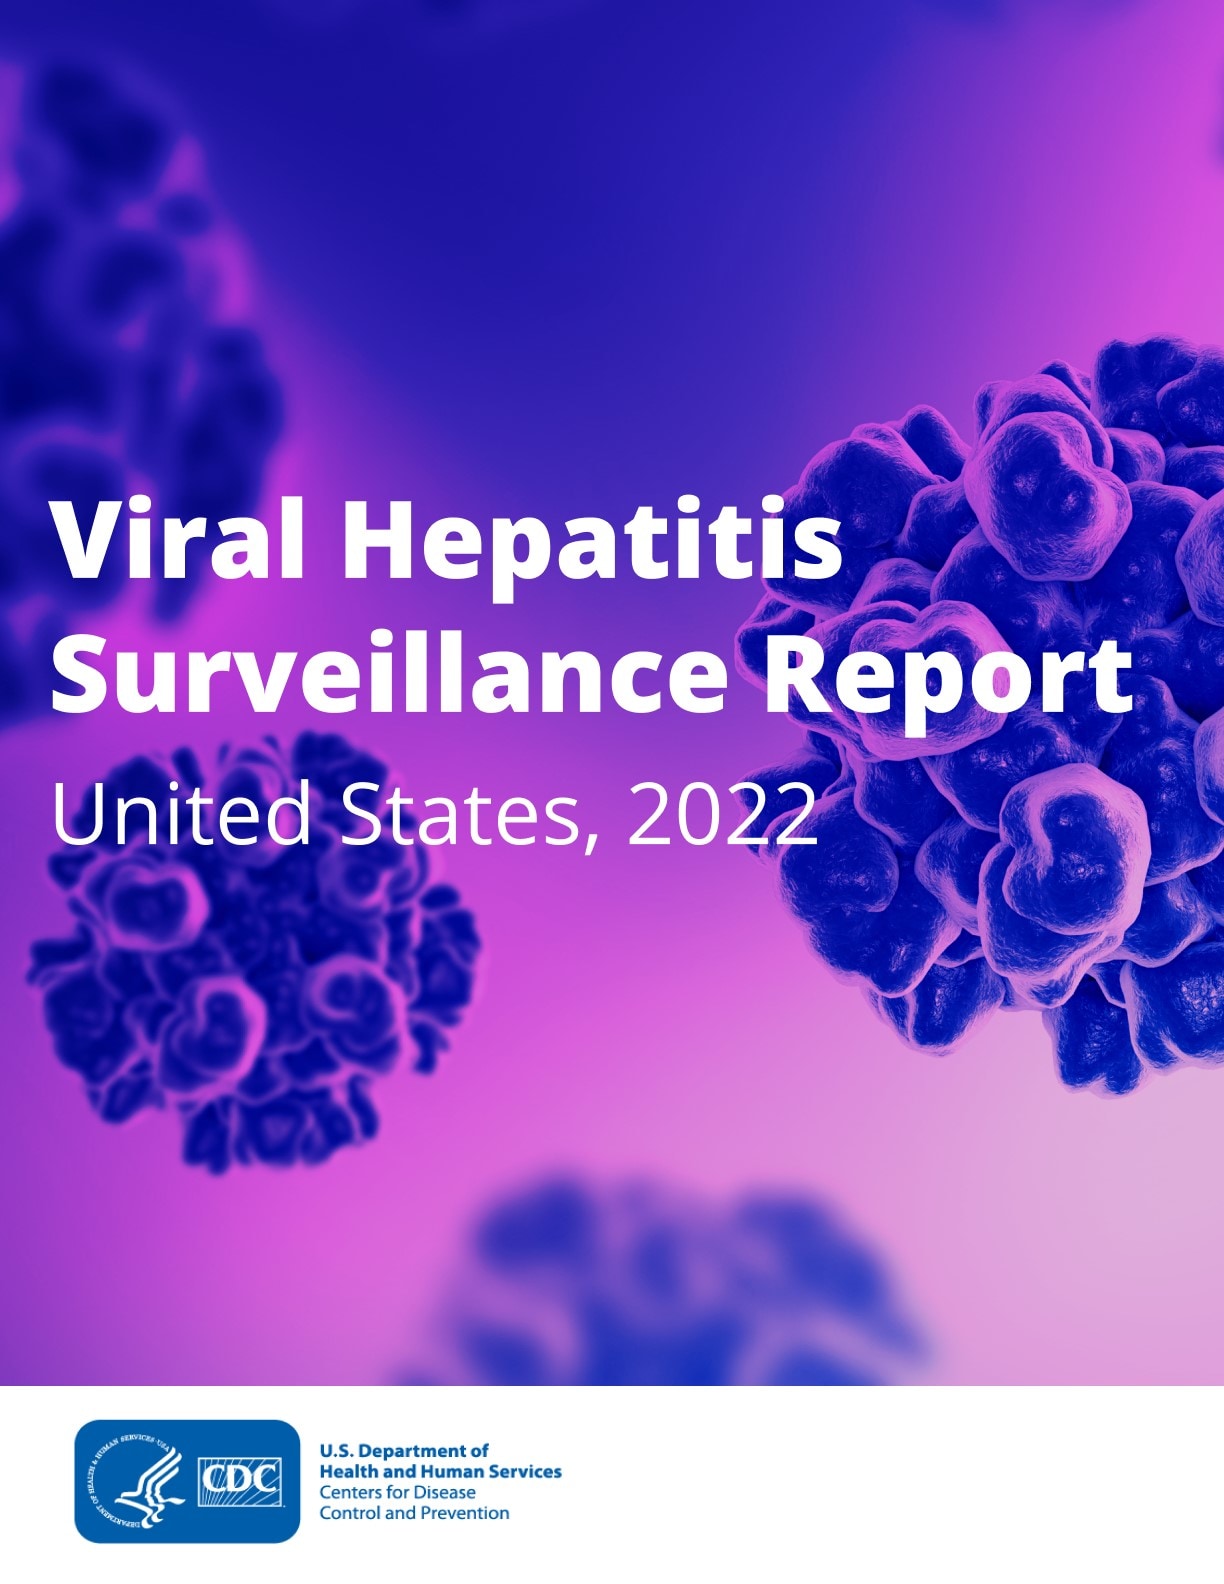 Graphic for the Viral Hepatitis Surveillance Report, 2022